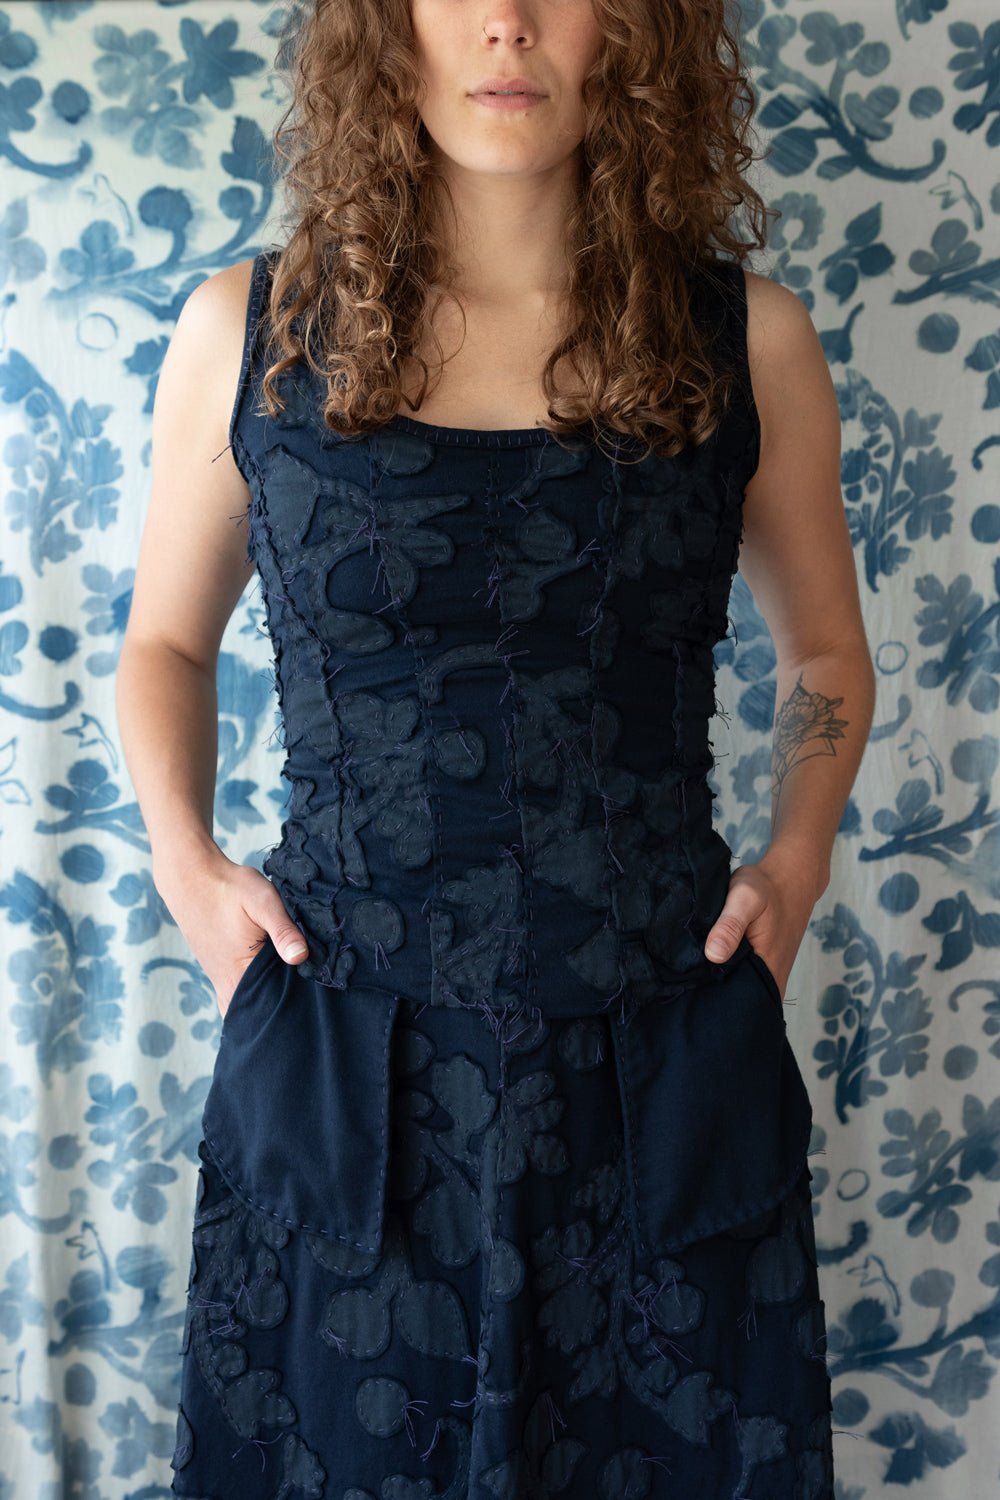 Alabama Chanin Gertrude Corset and Inside Out Skirt in Navy